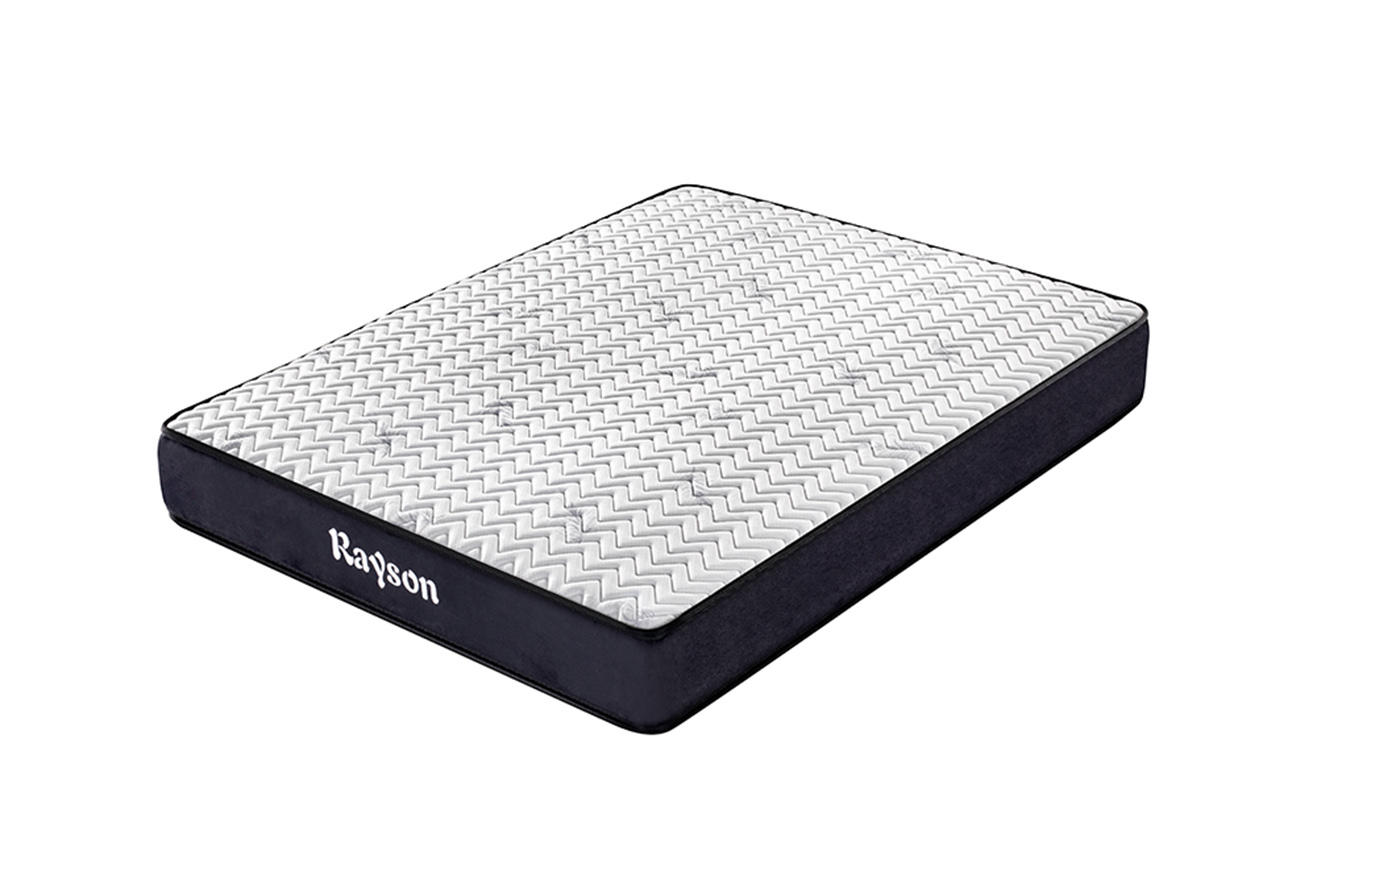 Synwin bedroom bonnell spring mattress price high-density for star hotel-1